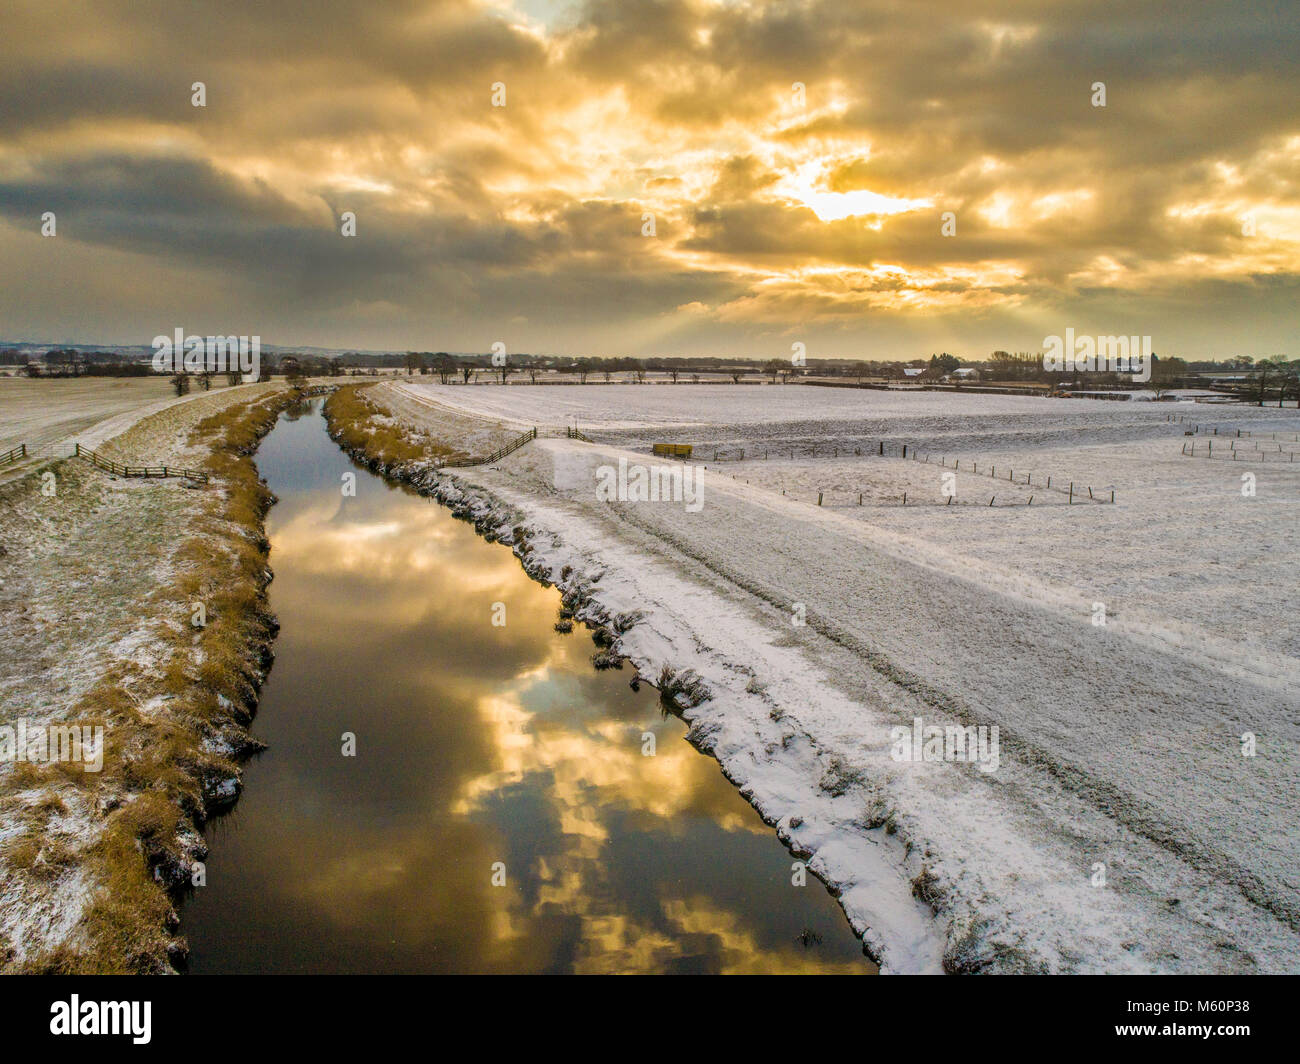 Great Eccleston, UK.  27th February 2018.  Drone captures sunrise over the snow covered fields around the River Wyre.  The clouds are reflected in the river and the frosty river bank can be seen on each side., with the Pennines in the background. Russell Millner / Alamy Live News. Stock Photo